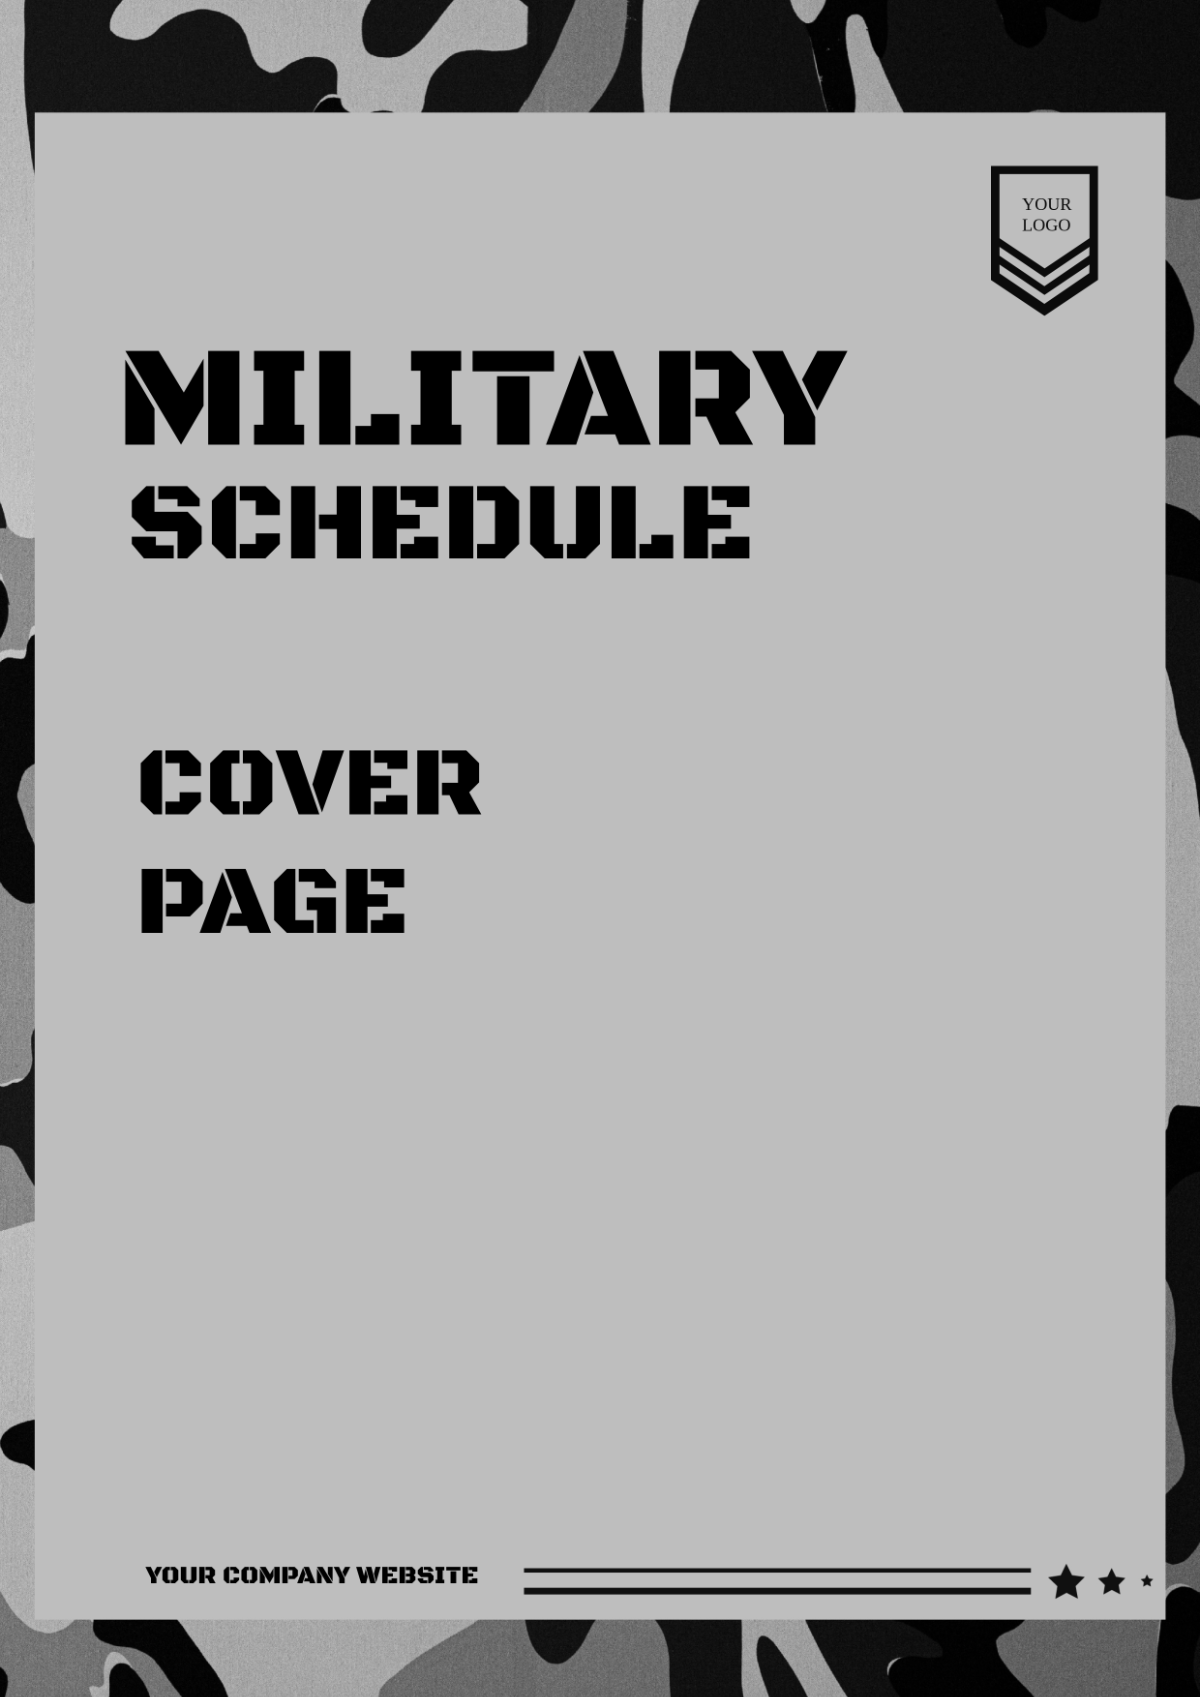 Military Schedule Cover Page